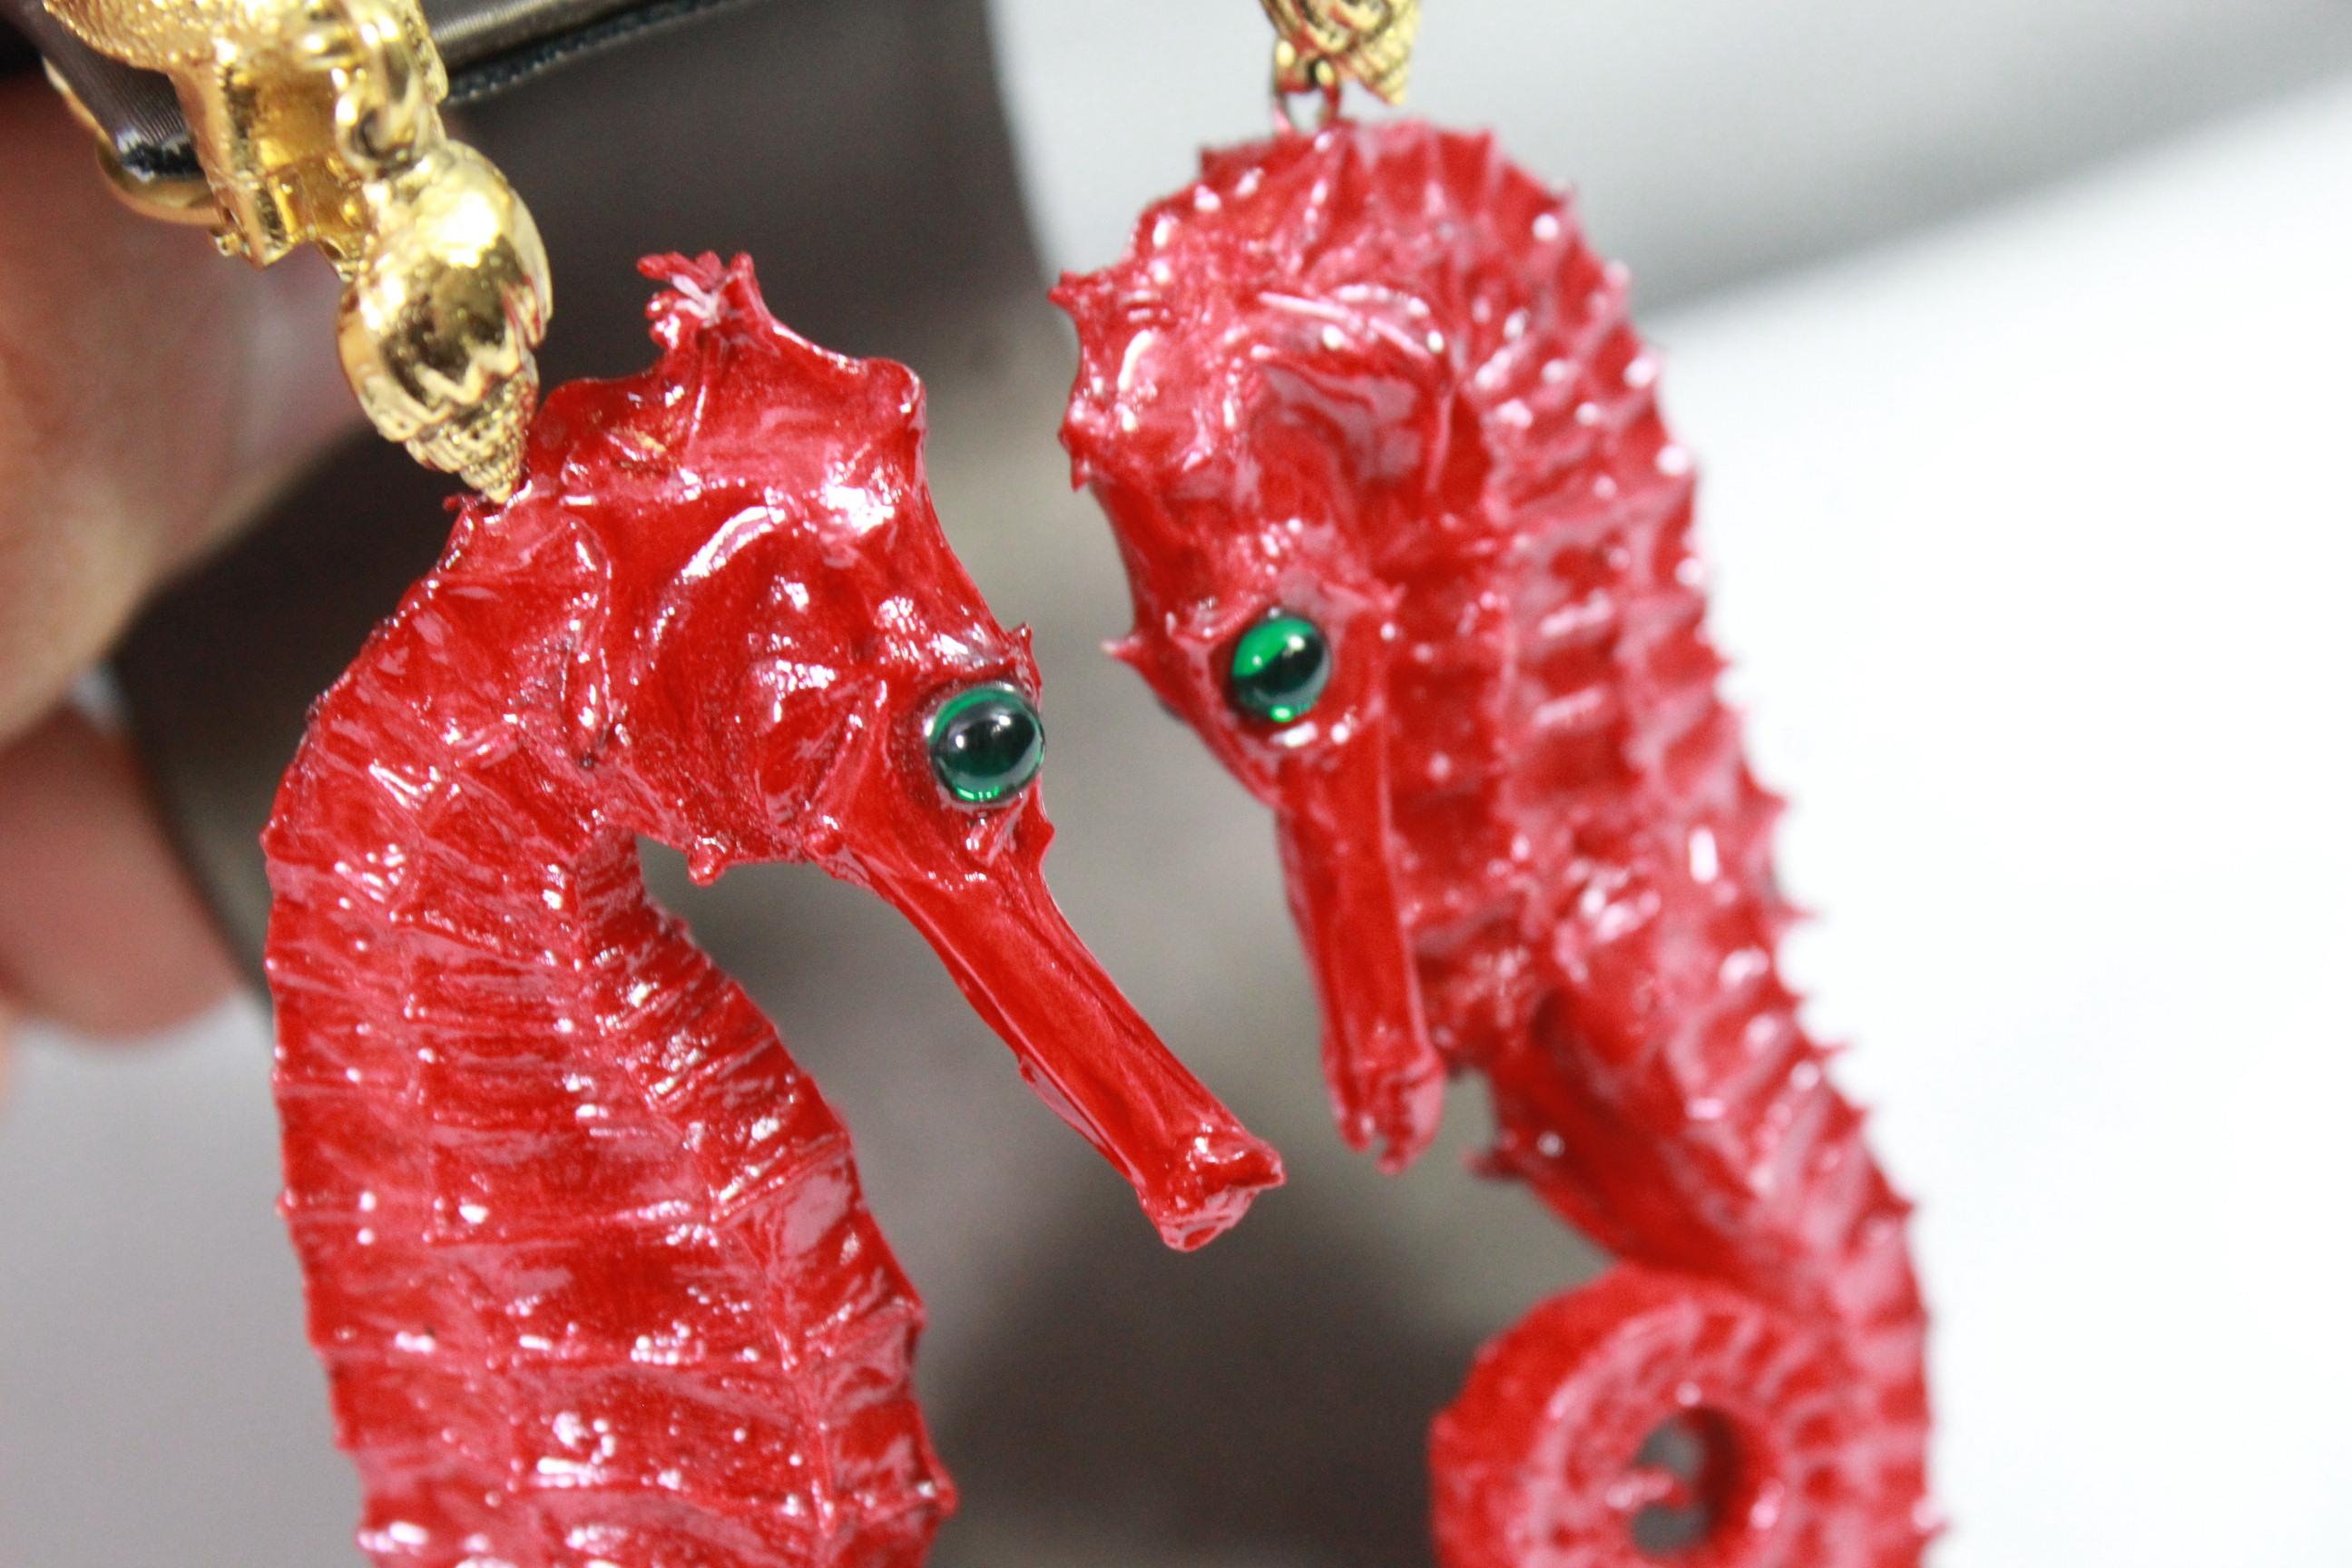 Rare pair of Yves saint laurrent vintage seahorses earings.
Signed in the clasp.
Really good vintage codition
One white stain in the bottom of one seahorse but it was like that when done

Size 11 cm